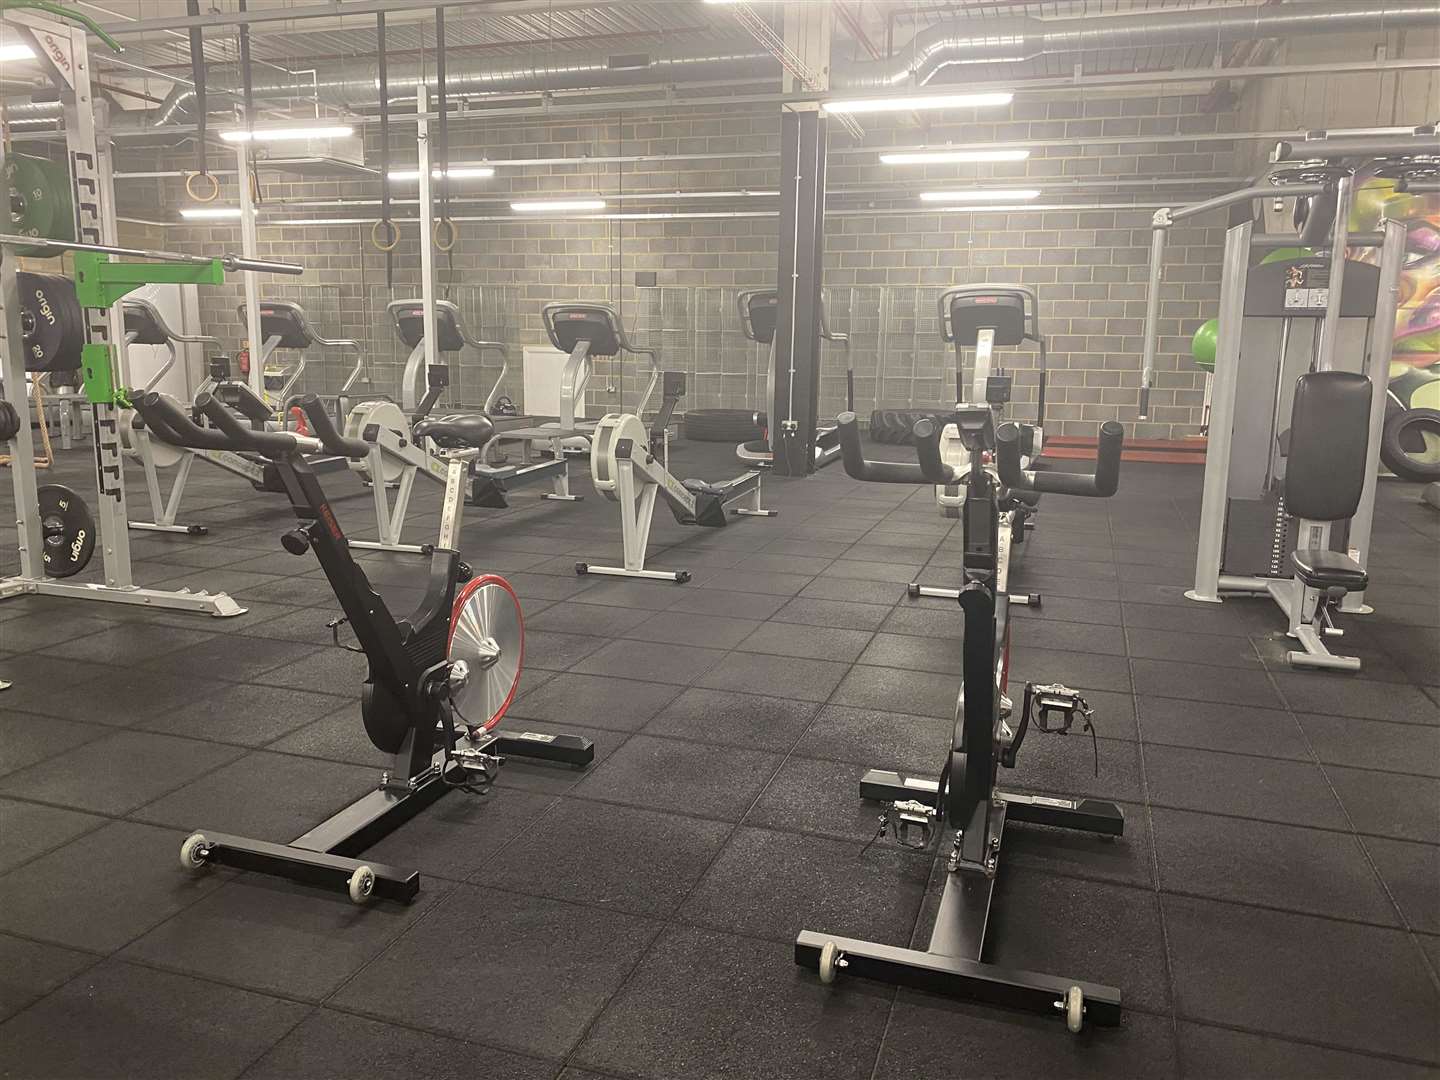 Jay's gym has been redesigned to adhere to social distancing rules